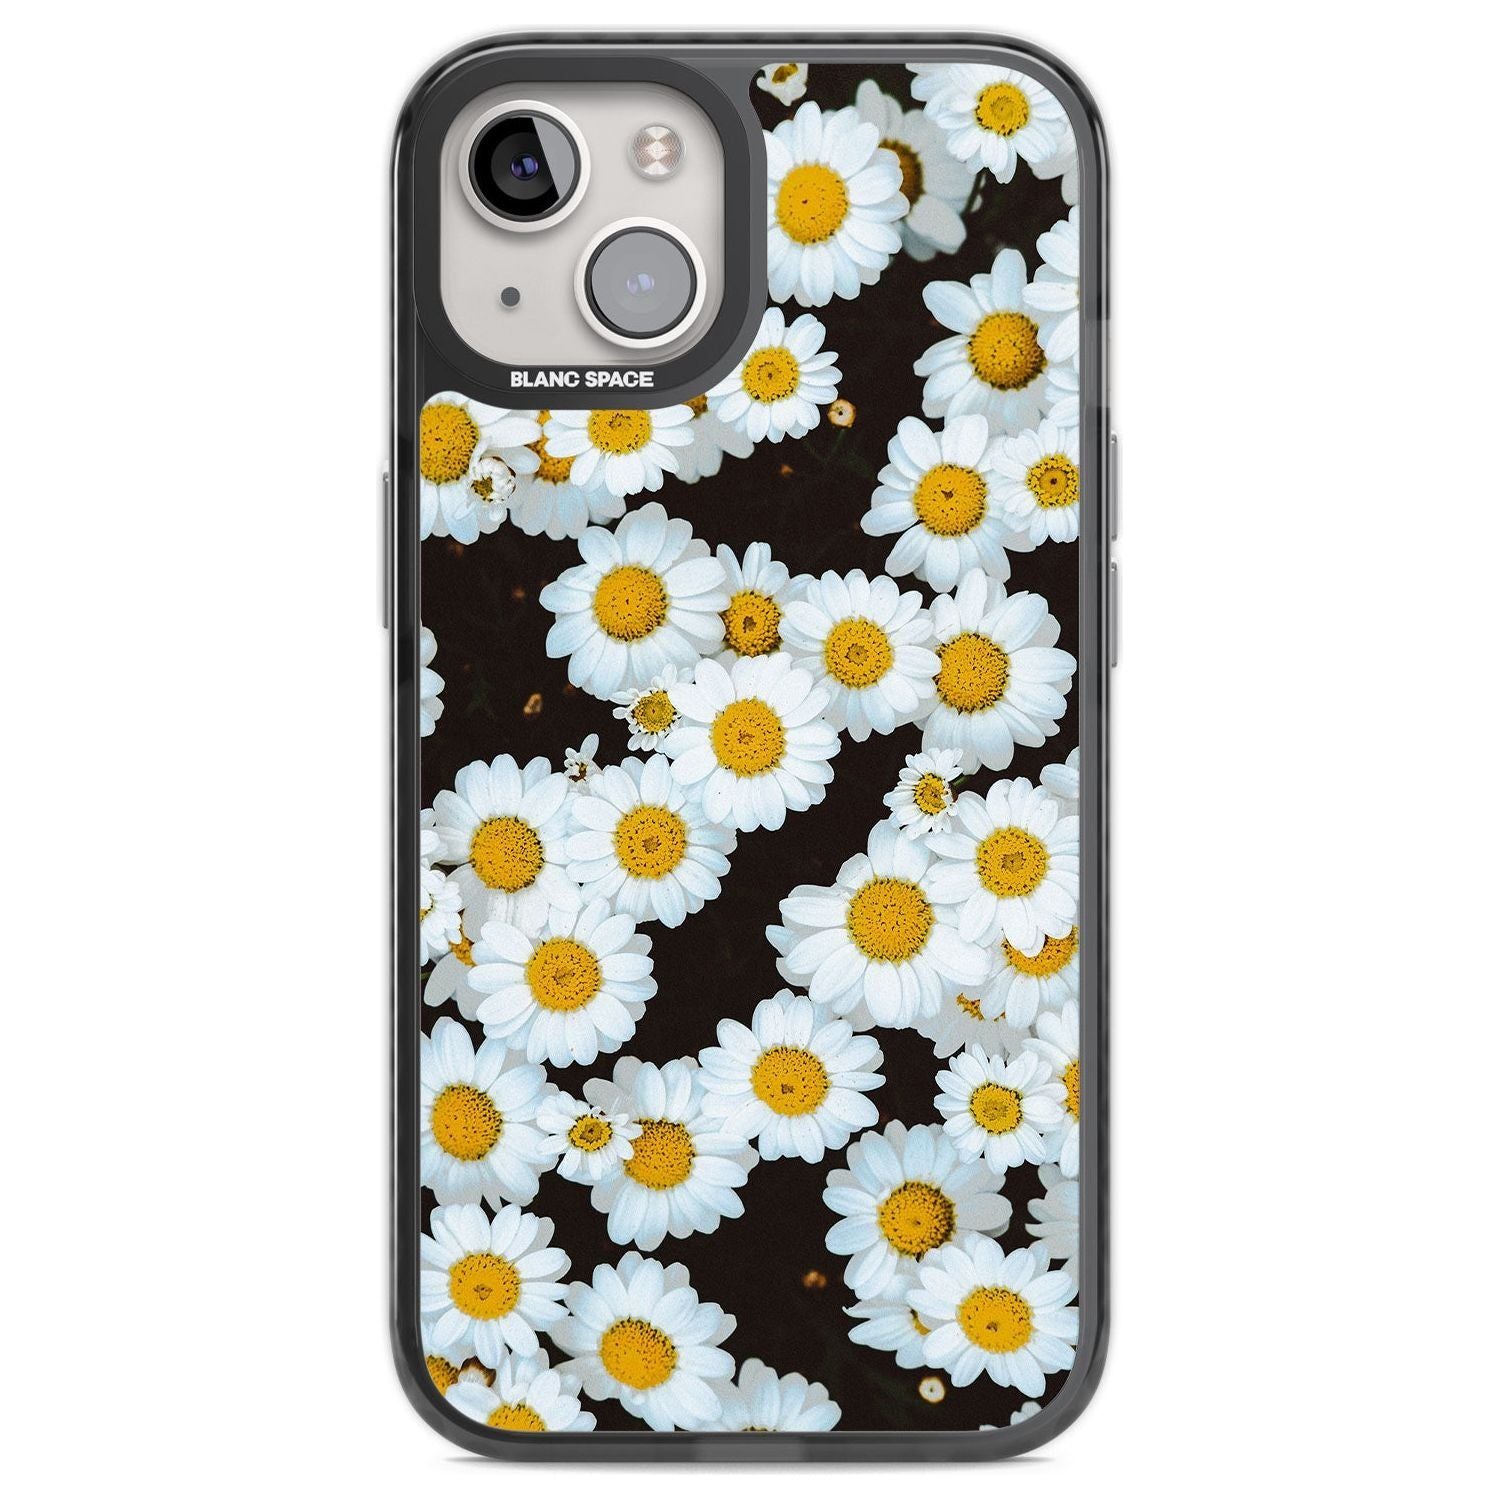 Daisies - Real Floral Photographs Phone Case iPhone 12 / Black Impact Case,iPhone 13 / Black Impact Case,iPhone 12 Pro / Black Impact Case,iPhone 14 / Black Impact Case,iPhone 15 Plus / Black Impact Case,iPhone 15 / Black Impact Case Blanc Space